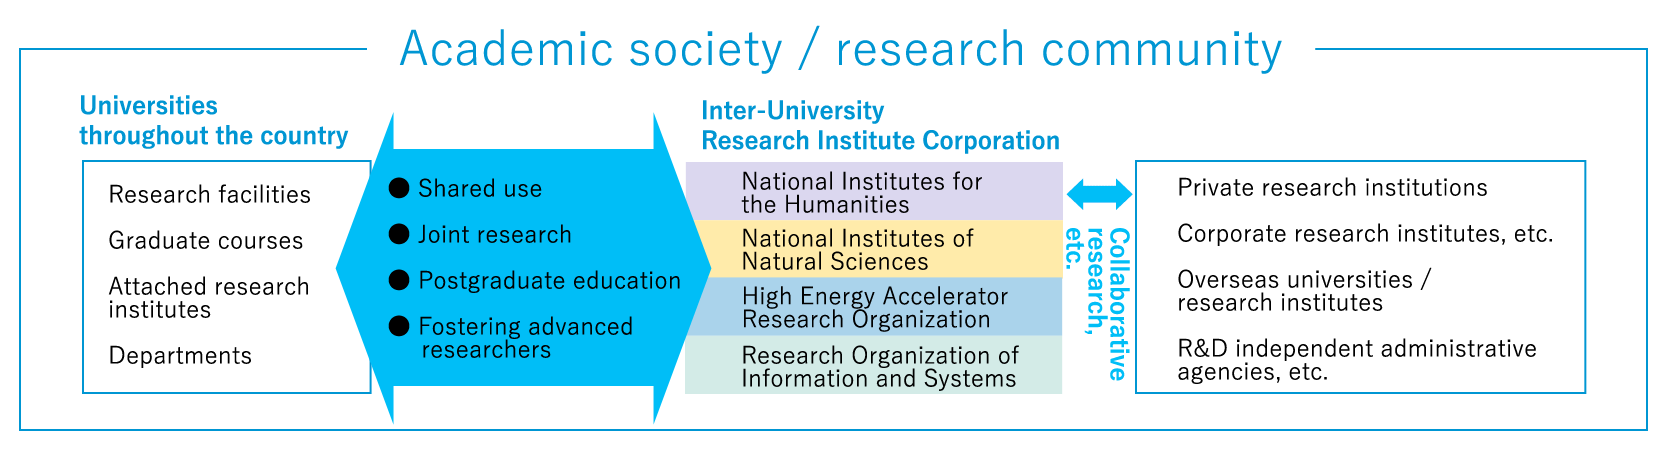 Academic society / research community